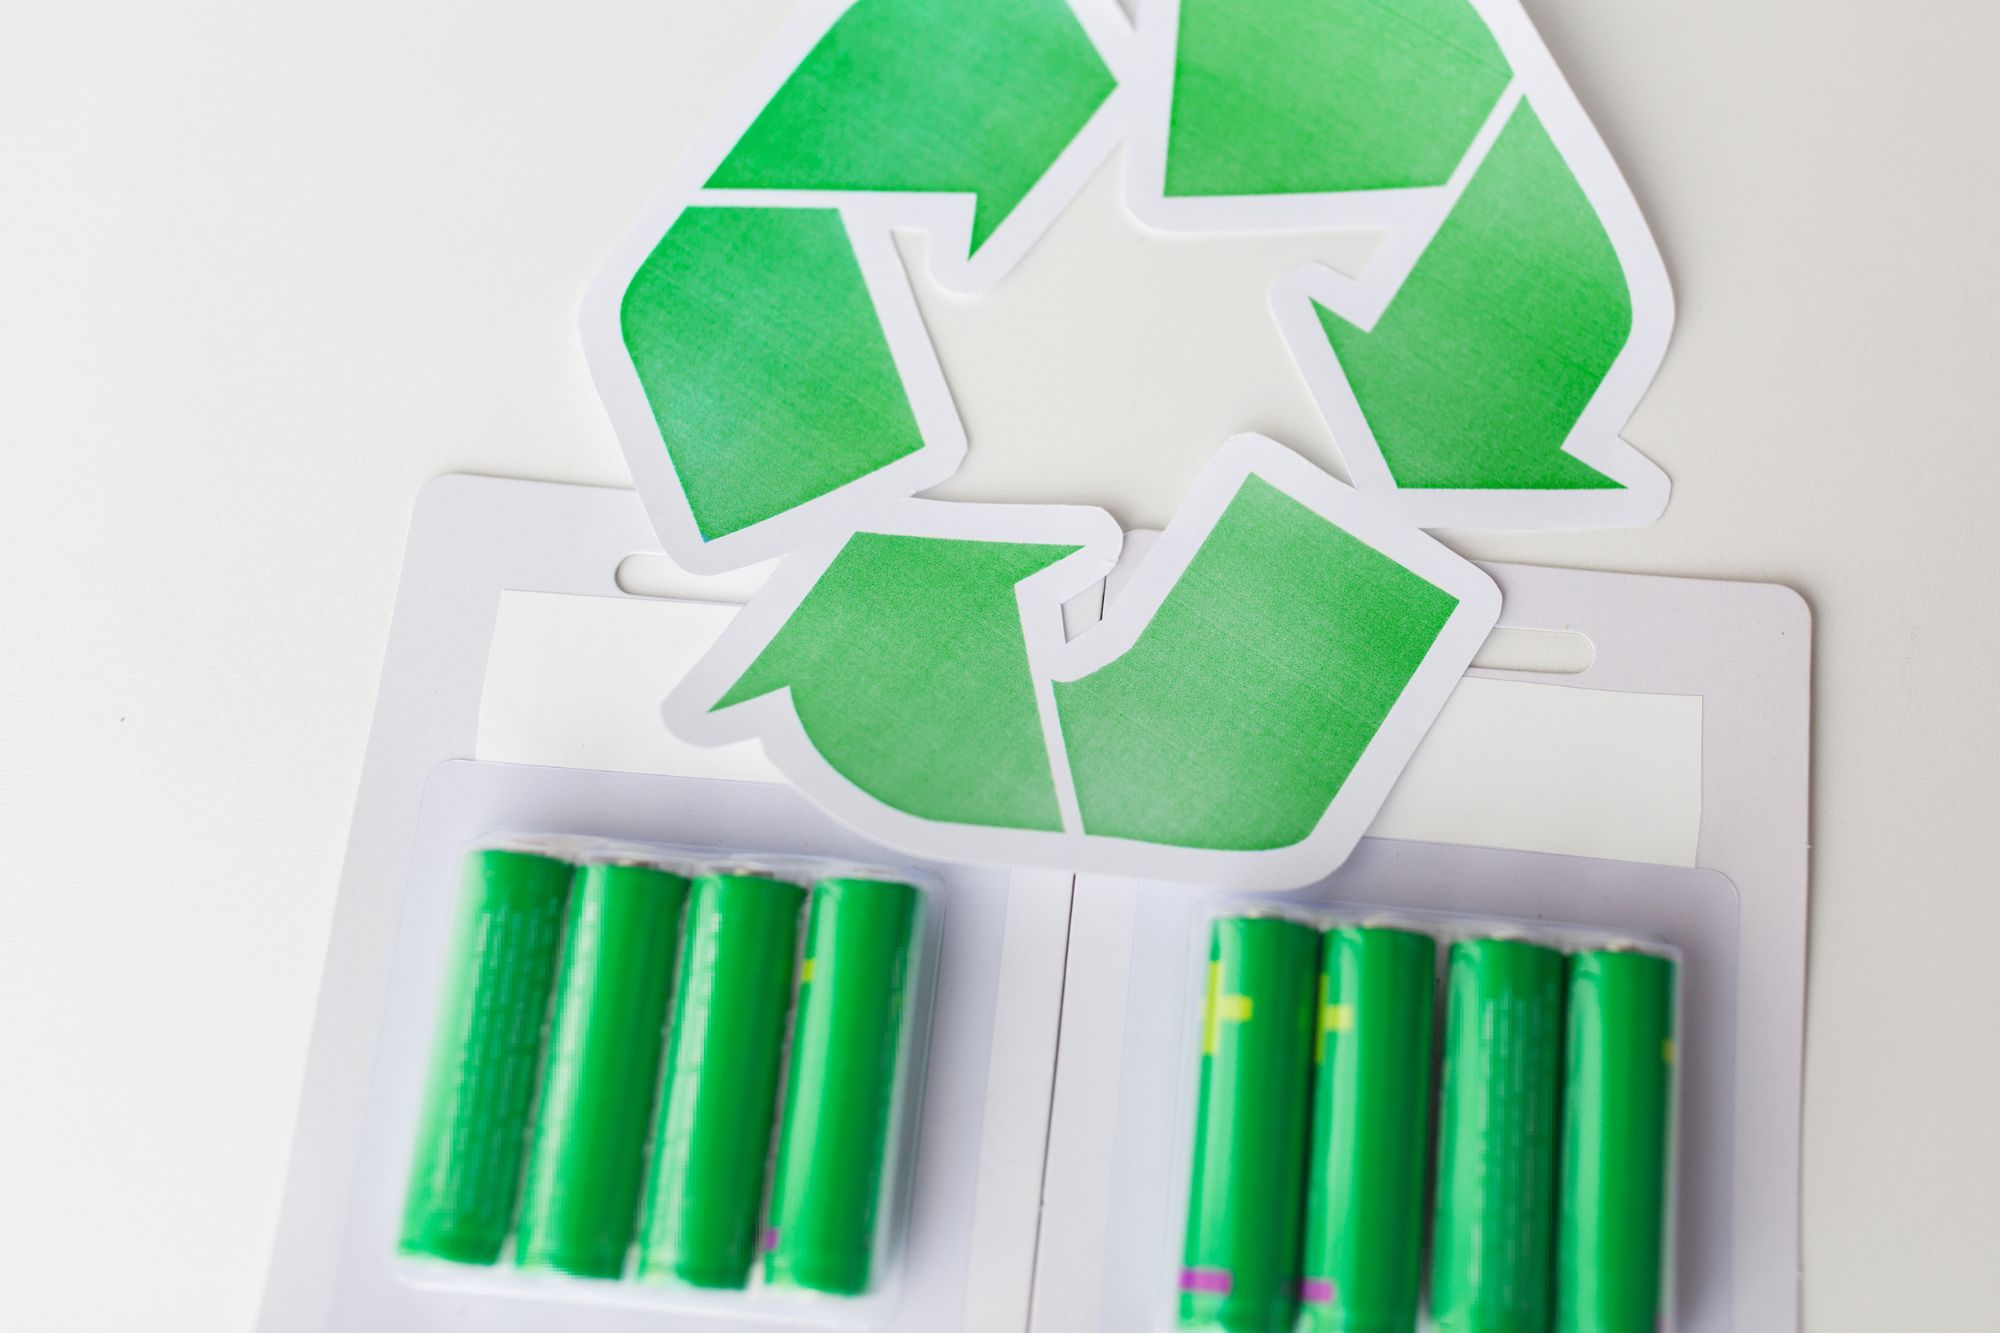 Call For Tougher UK Battery Recycling And Reuse Targets